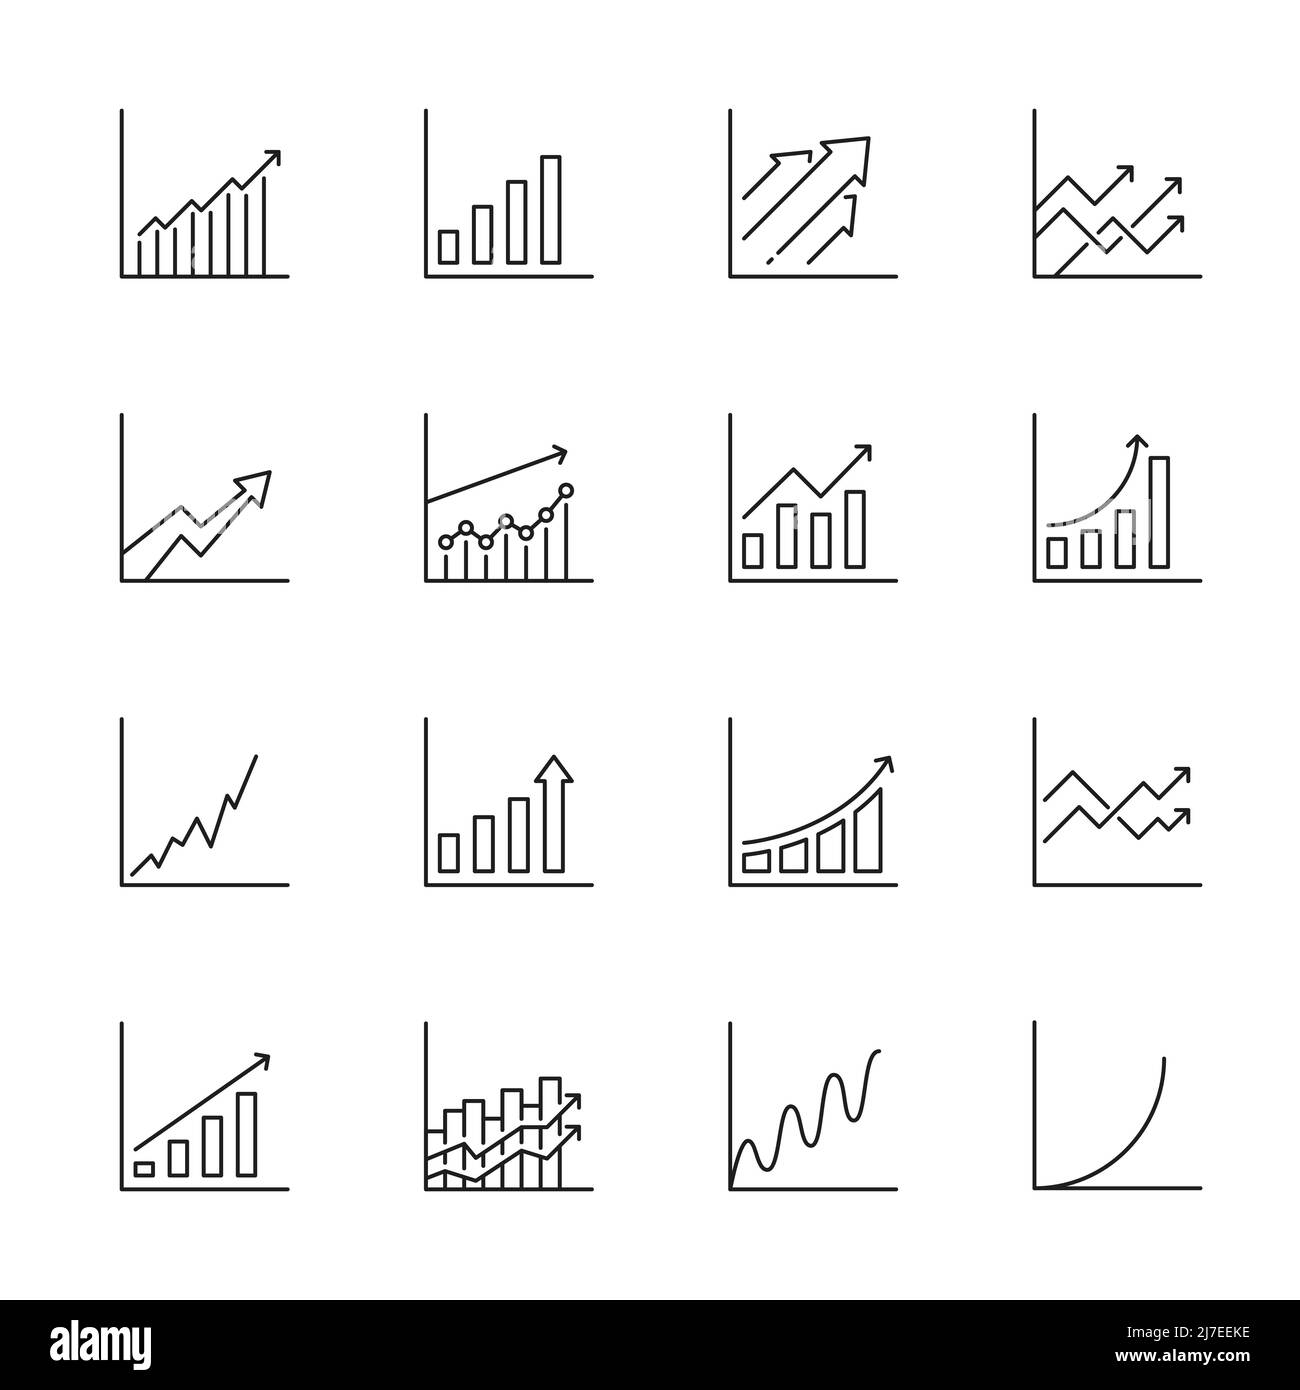 Graph, chart and bar growth icons with increase arrow. Vector line charts and bar graphs with growing data graphics. Business, finance and economy statistic information presentation, profit report Stock Vector